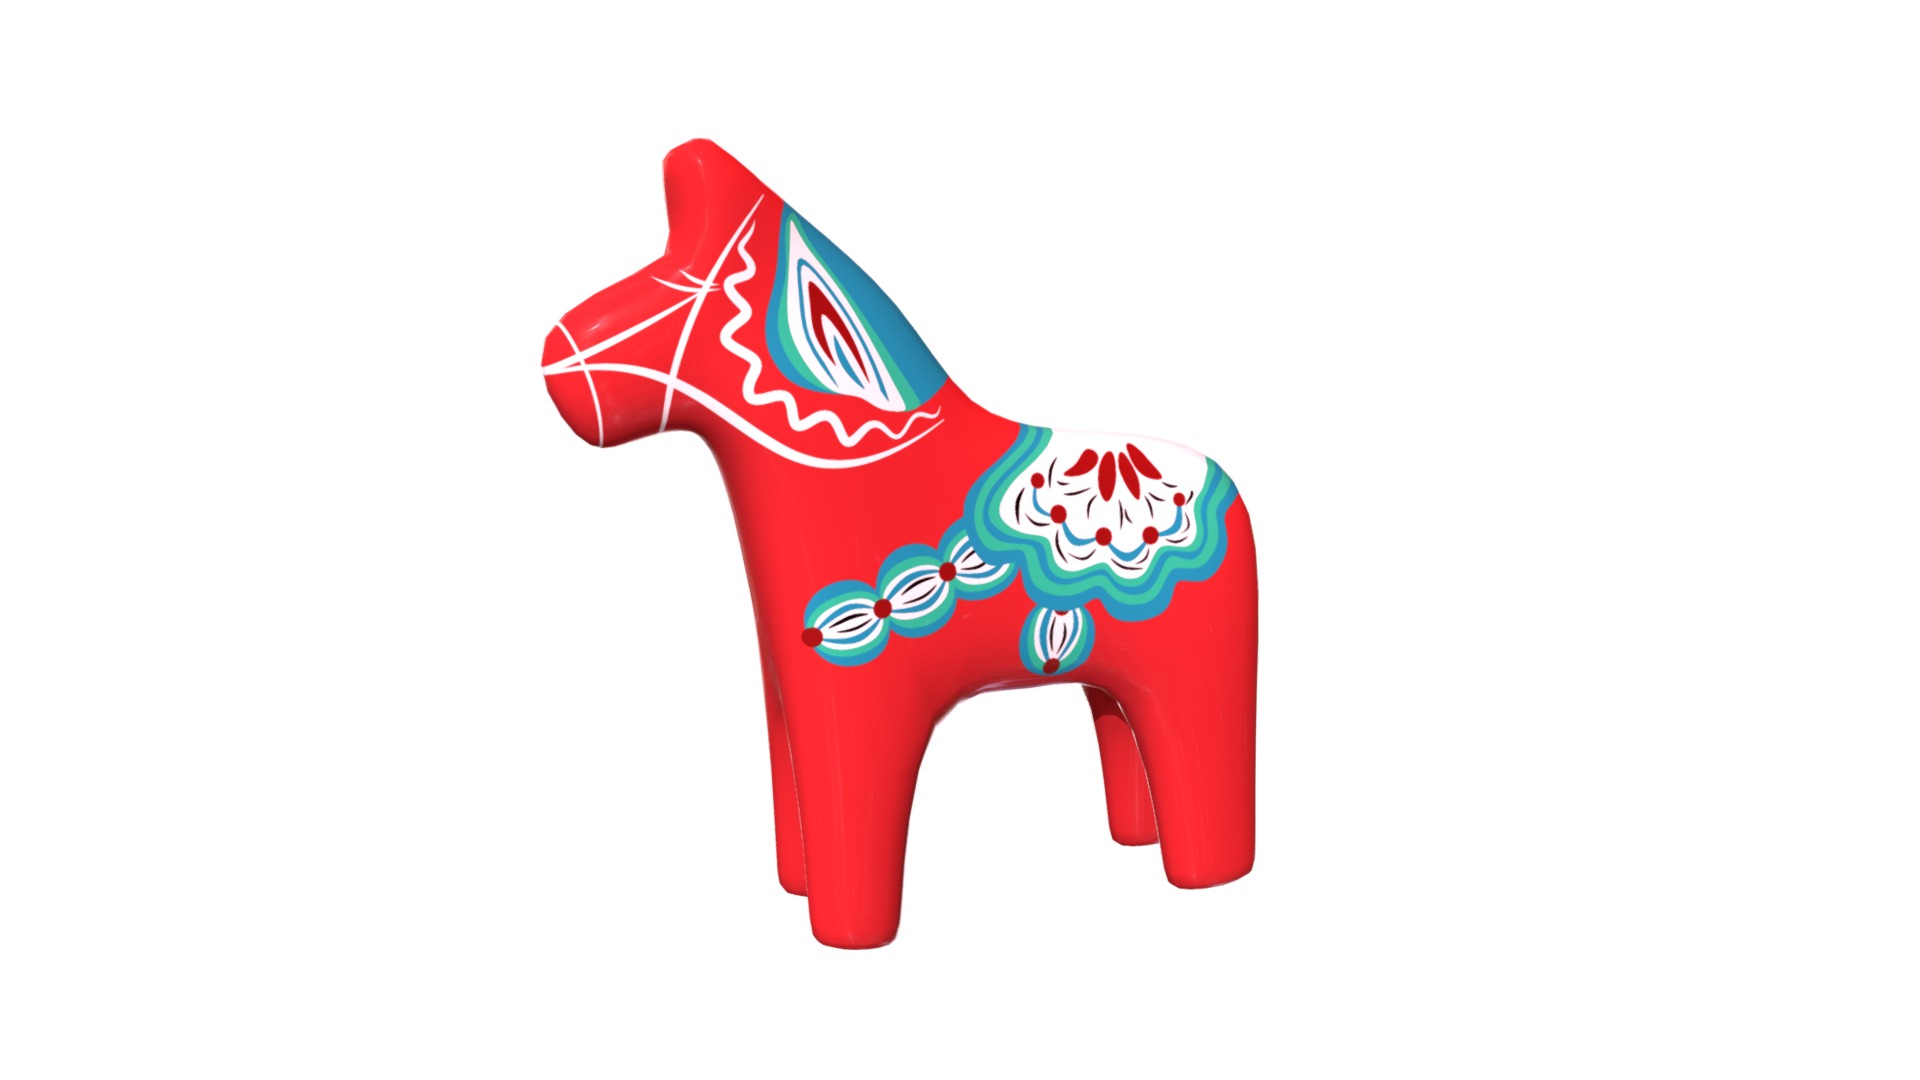 3D model Dala Wooden Horse - This is a 3D model of the Dala Wooden Horse. The 3D model is about a red plastic toy.